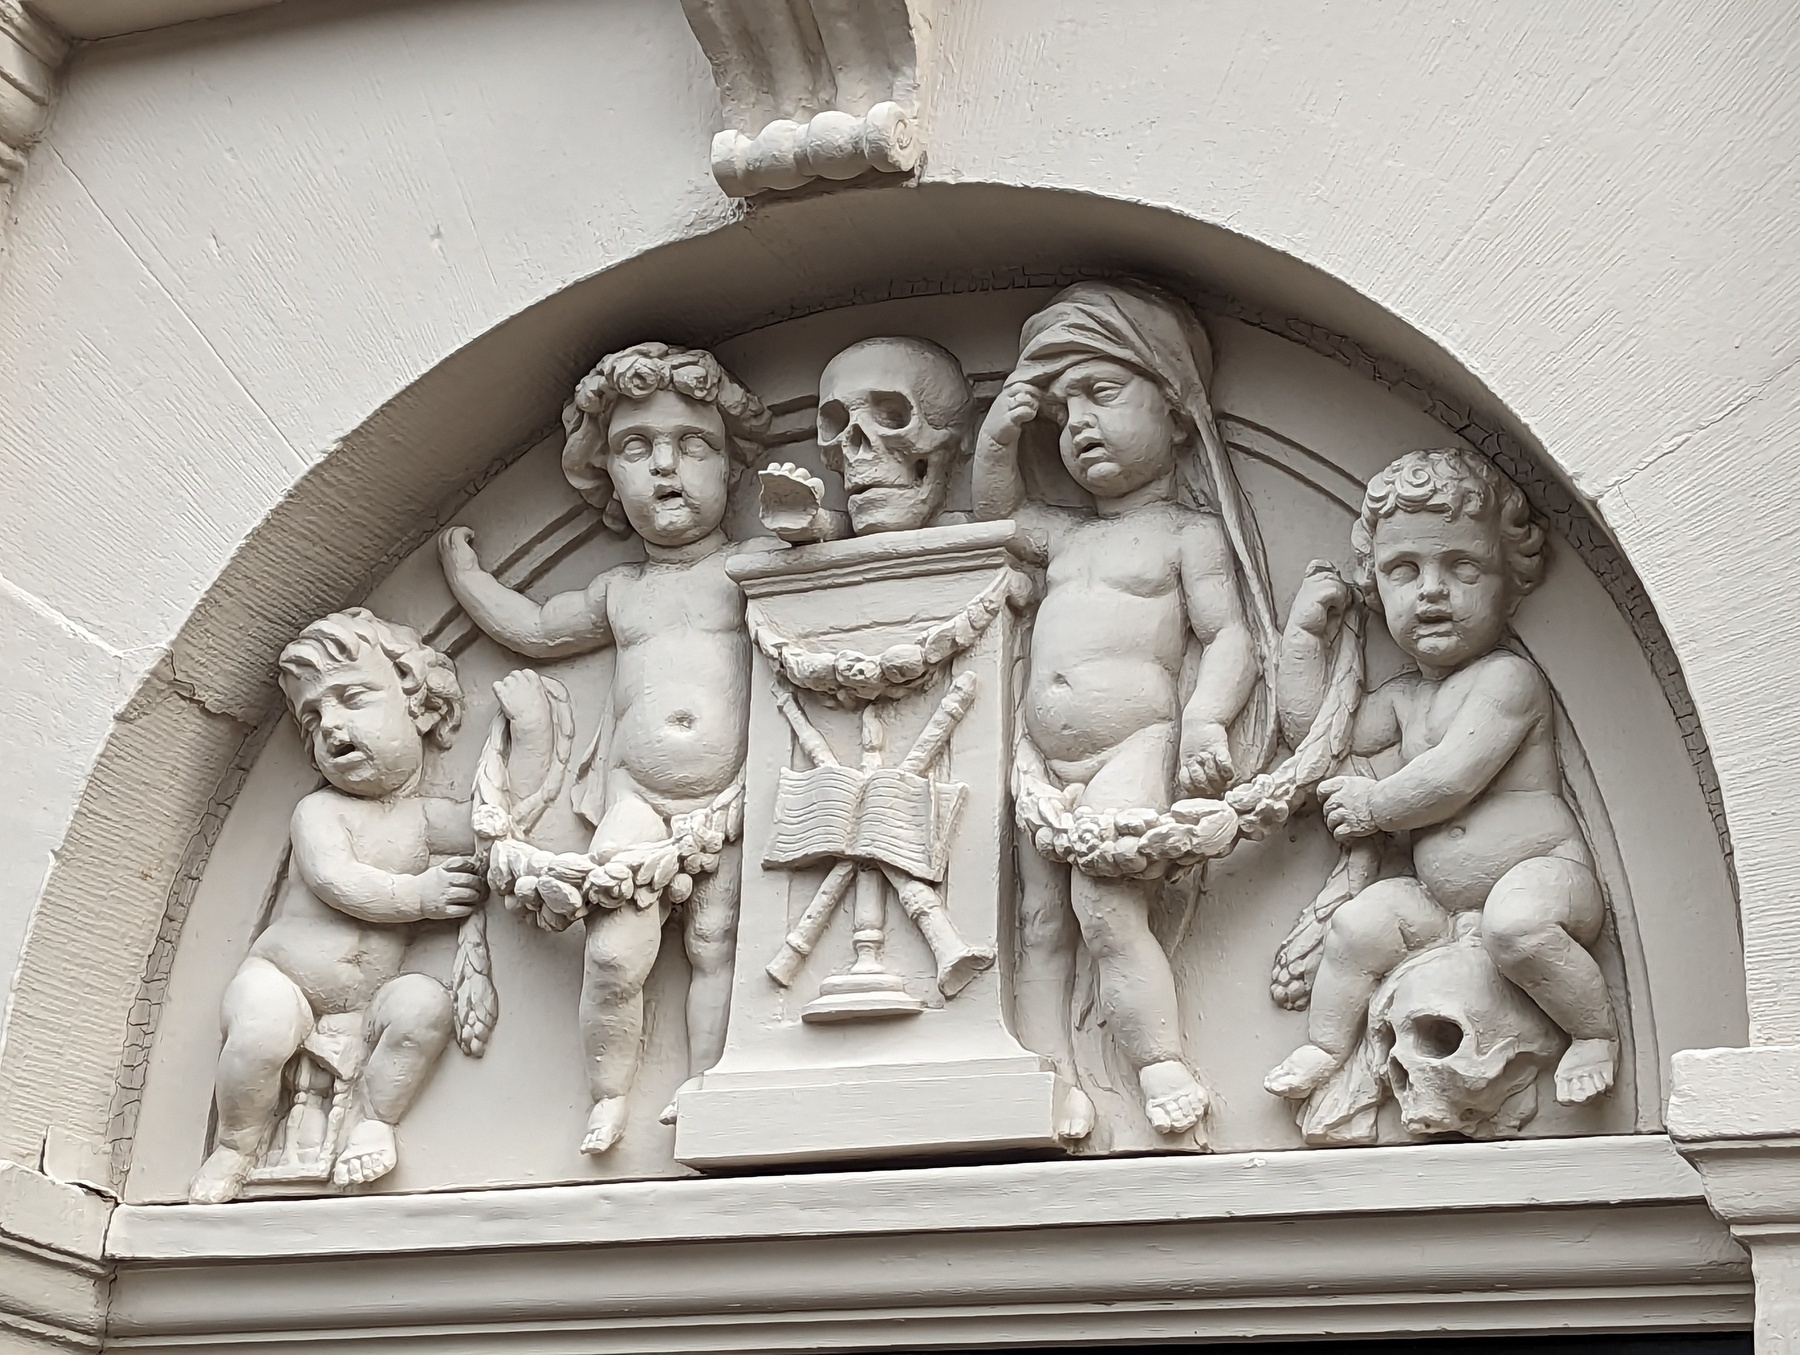 A stone relief. A skull sits on a pedestal. The pedestal is adorned with woodwind instruments and sheet music. Four babies surround the pedestal, two on each side. The two closest to the pedestal stand. The baby on the far left sits on an hourglass. The baby on the far right sits on a skull.